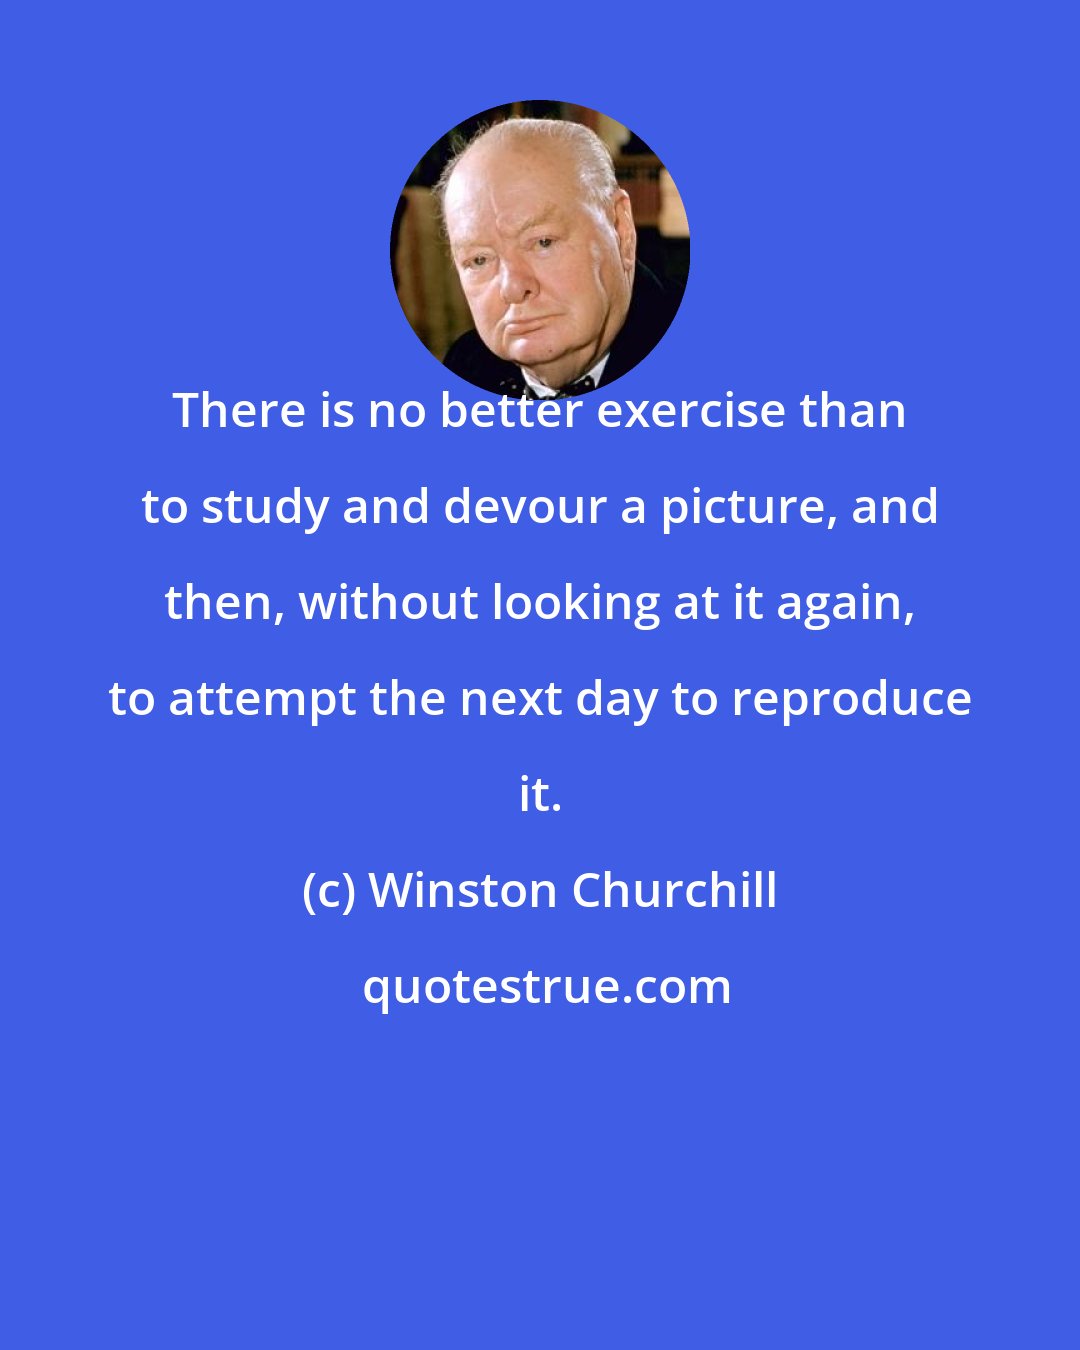 Winston Churchill: There is no better exercise than to study and devour a picture, and then, without looking at it again, to attempt the next day to reproduce it.